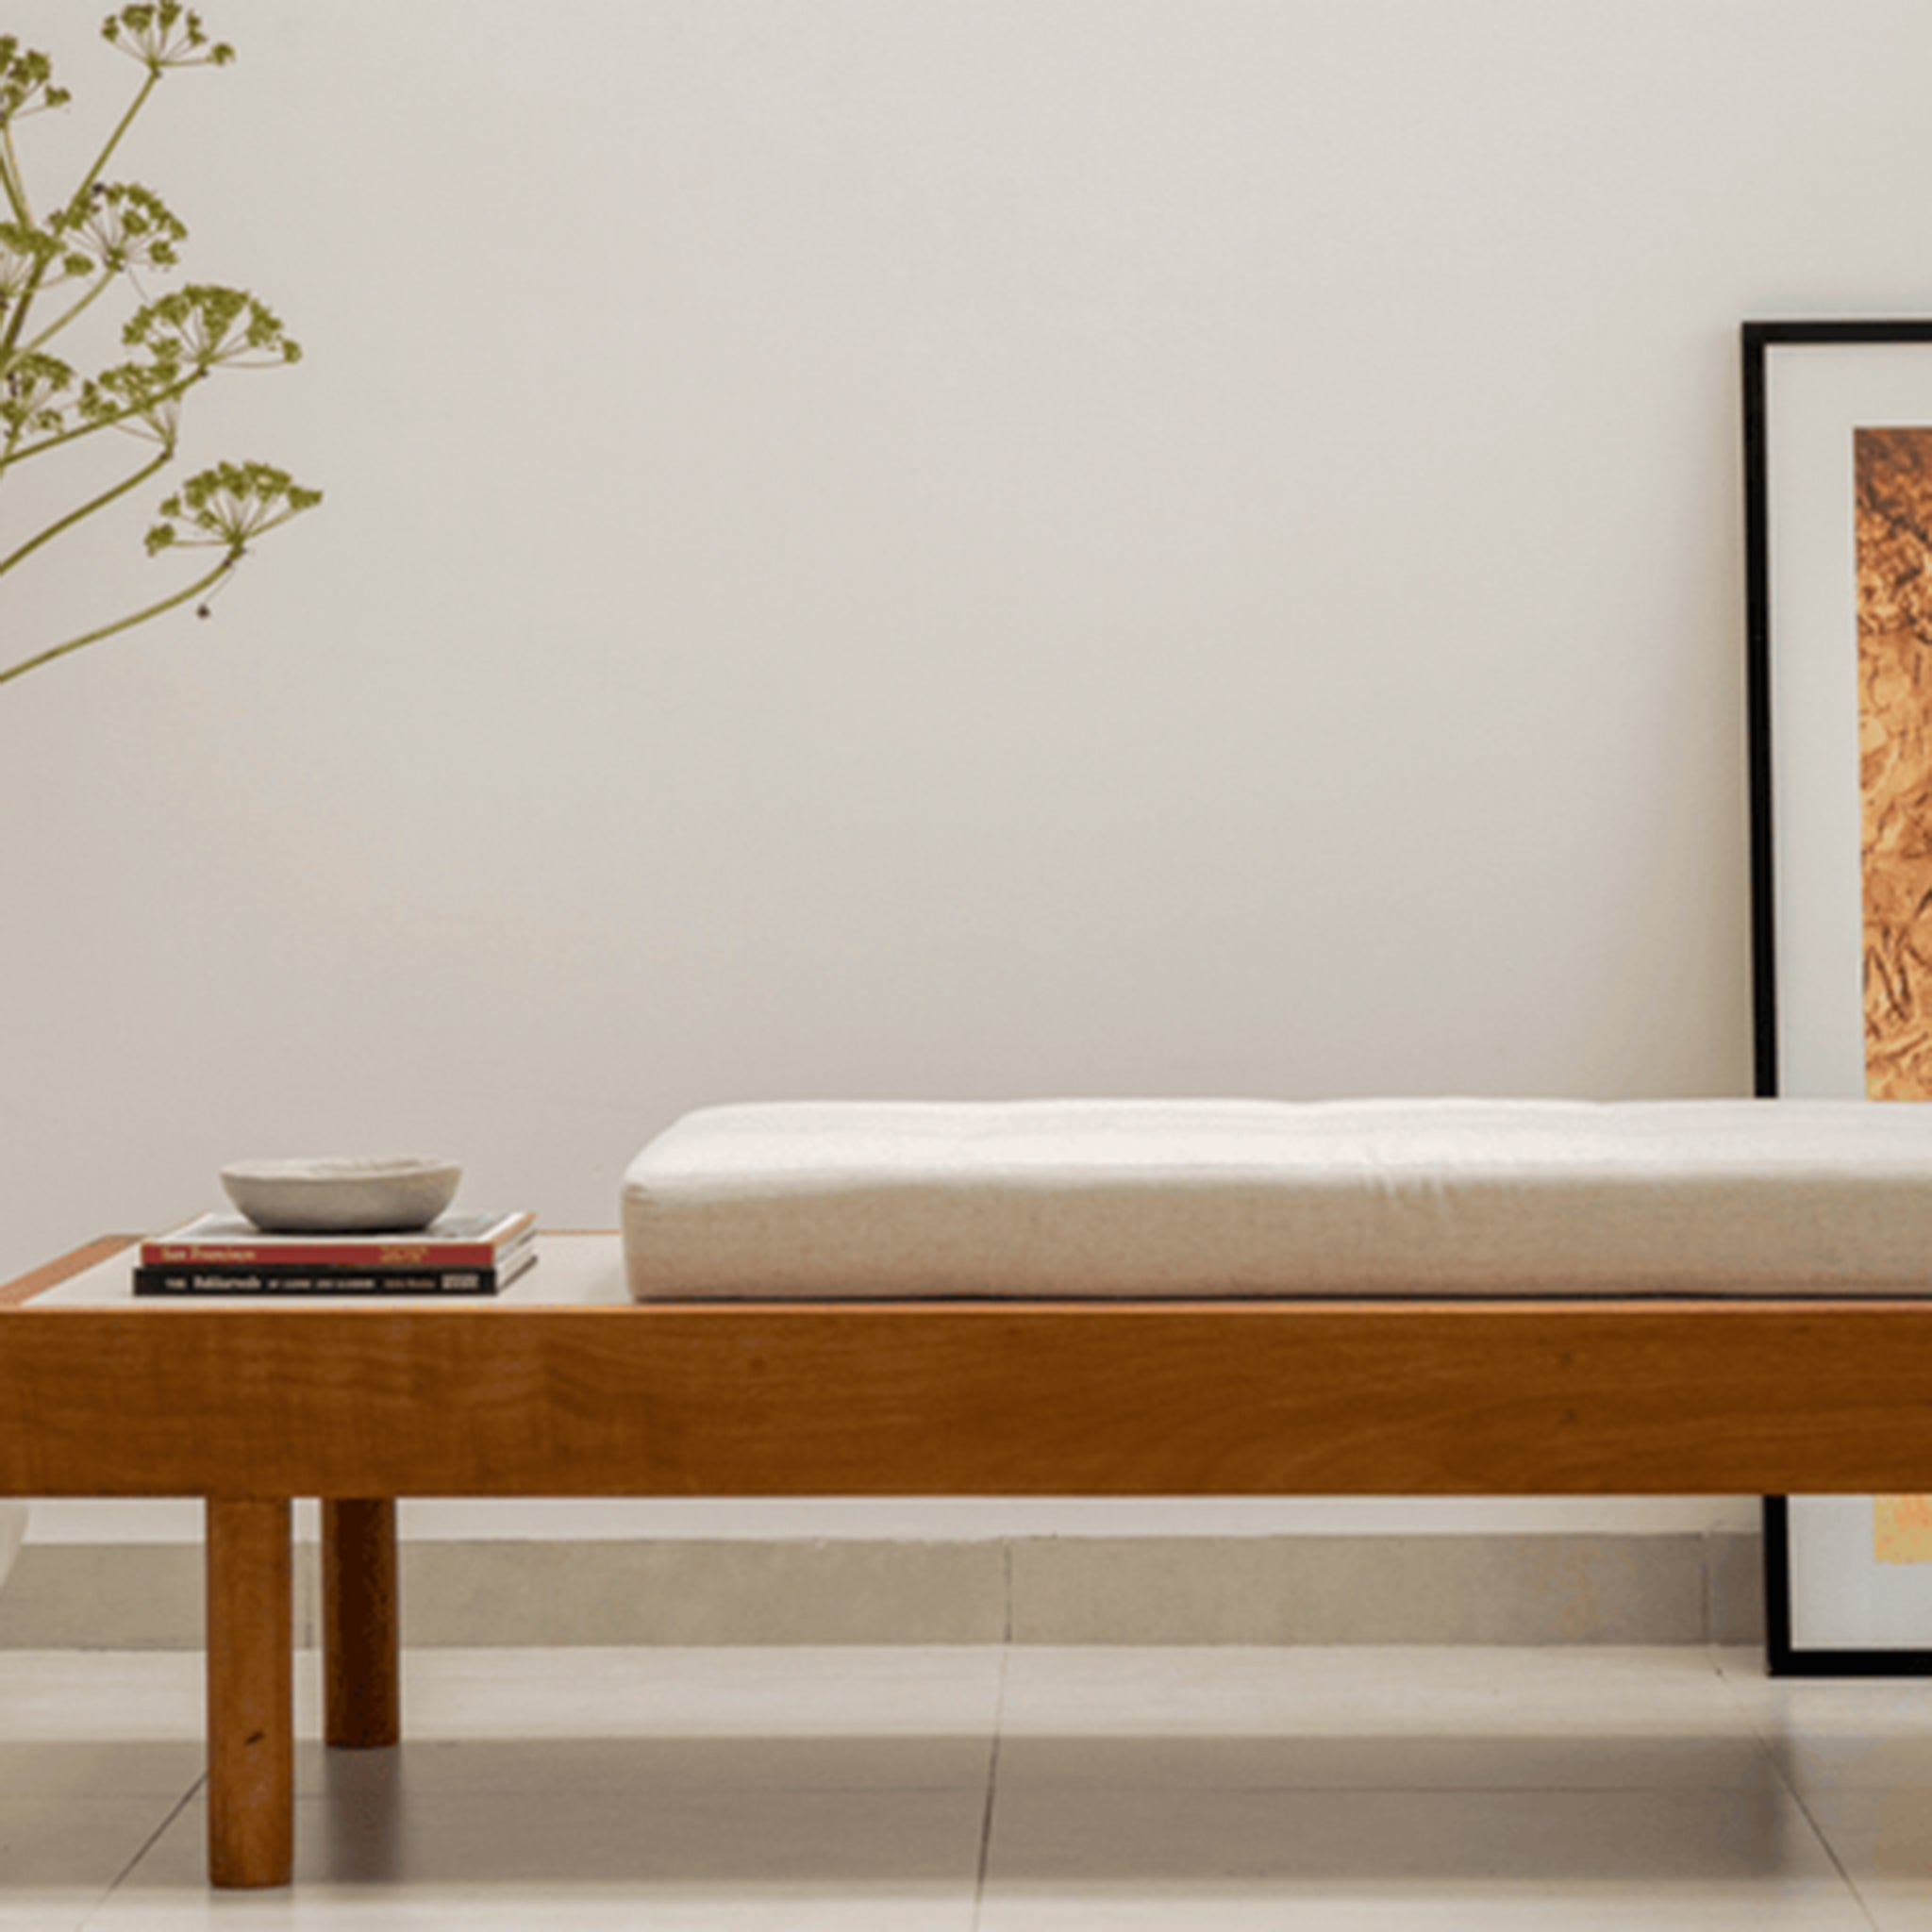 Modern wooden daybed with a customizable cushion and a side tray, placed in a minimalist room with a large vase and framed artwork